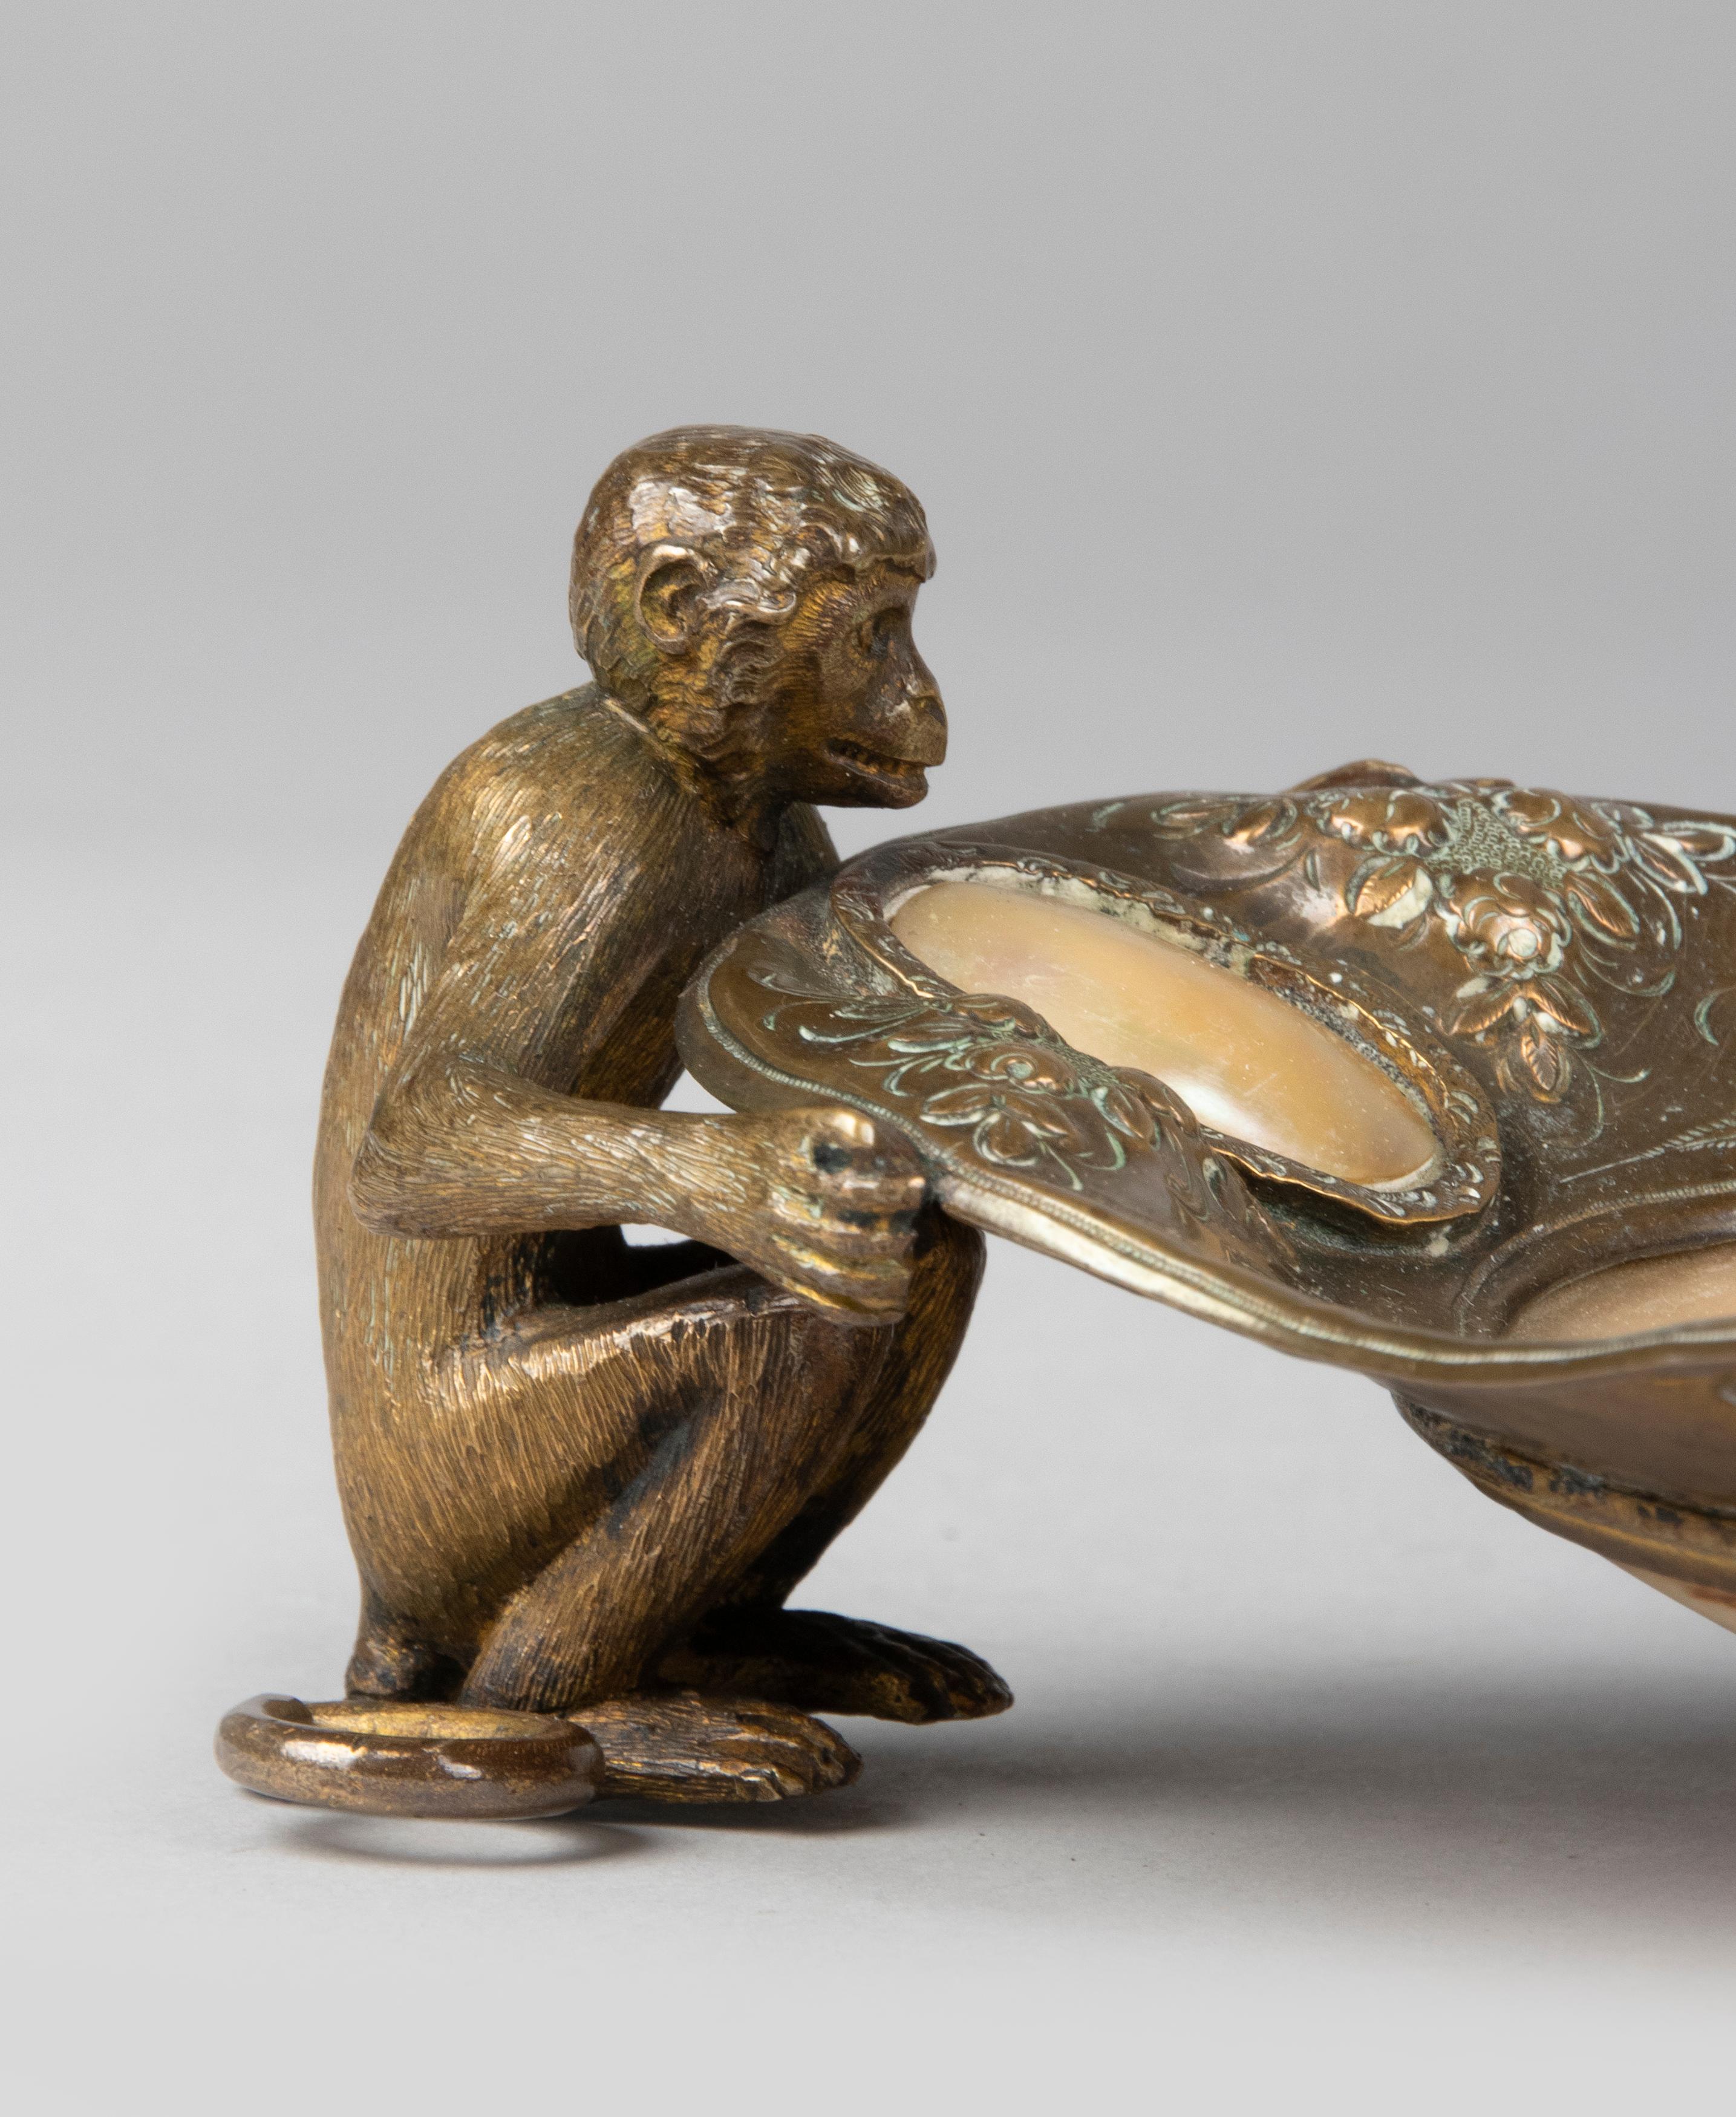 Special bronze vide poche depicting two monkeys holding a bowl. The object is made of fine bronze, hammered with beautiful patterns. The dish is inlaid with mother-of-pearl. Special decorative item with an animal theme. Nice old patina.